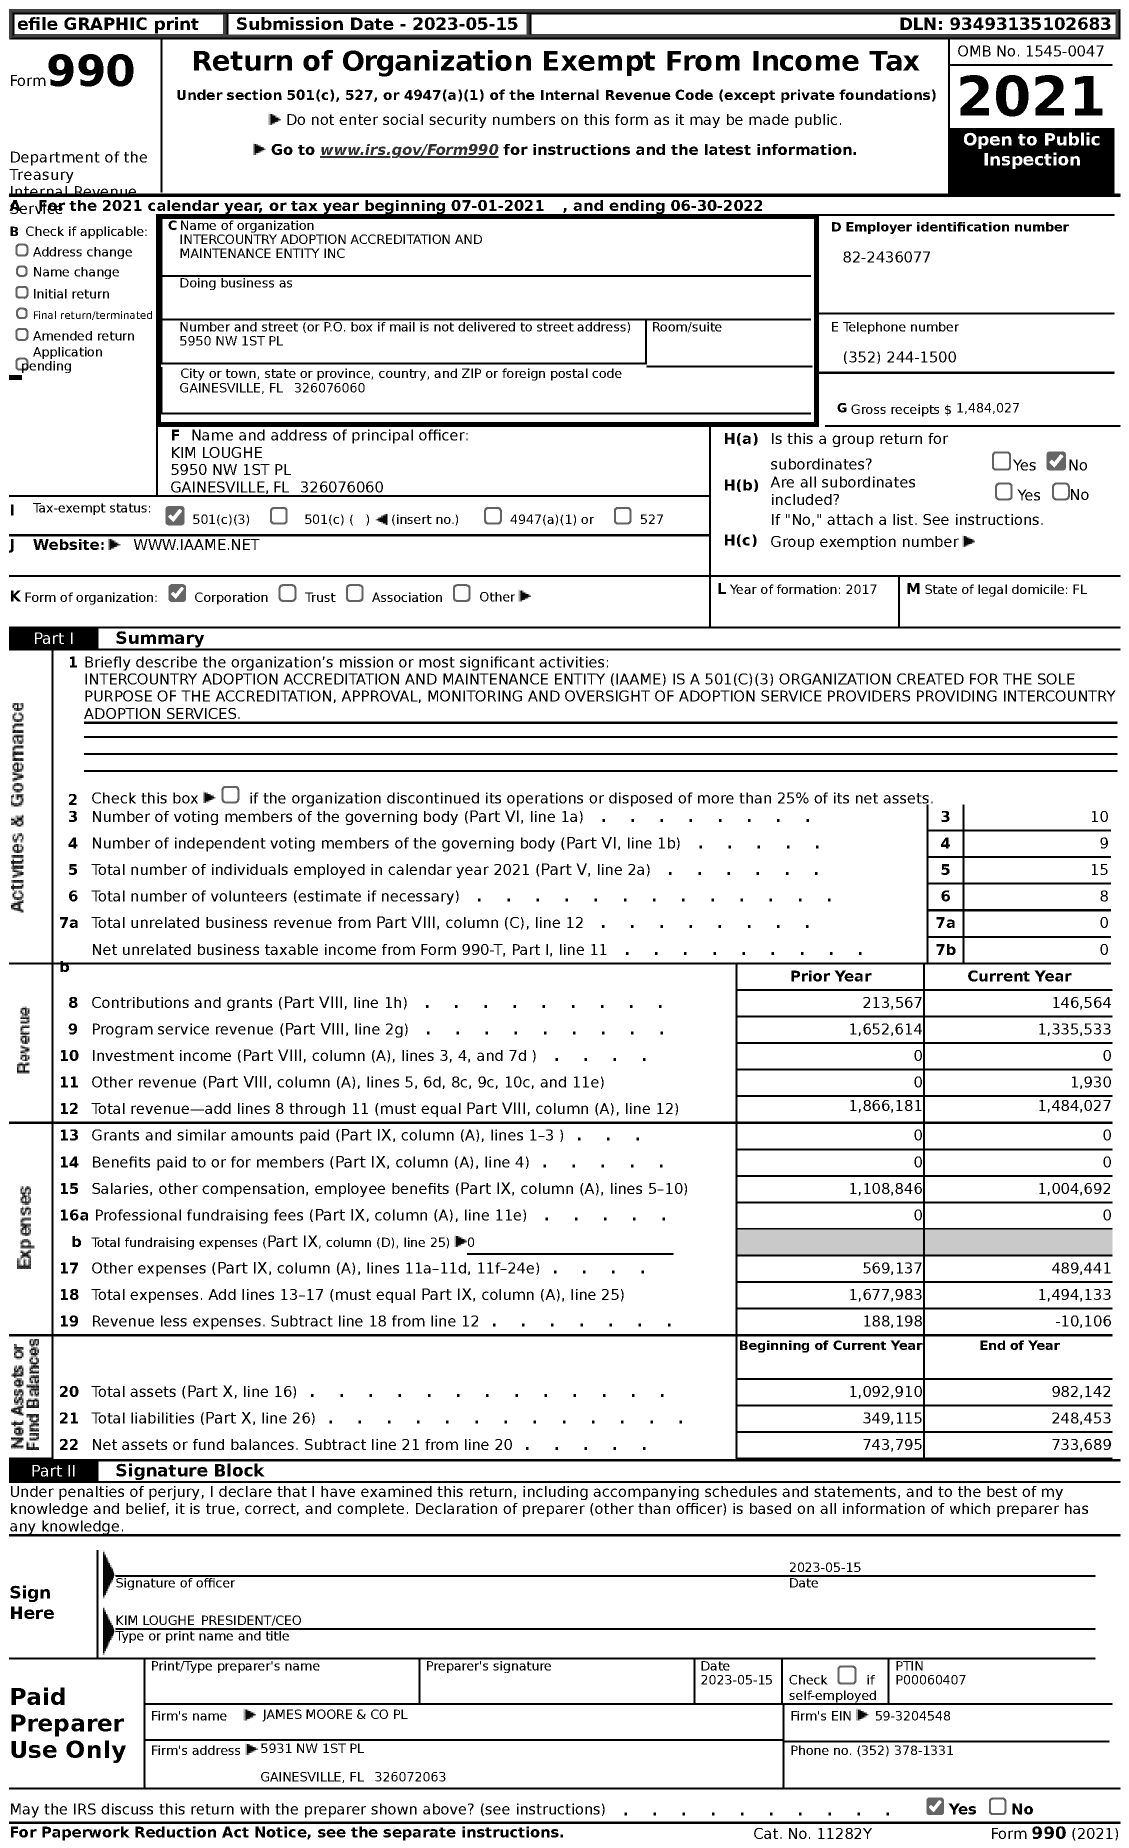 Image of first page of 2021 Form 990 for Intercountry Adoption Accreditation and Maintenance Entity